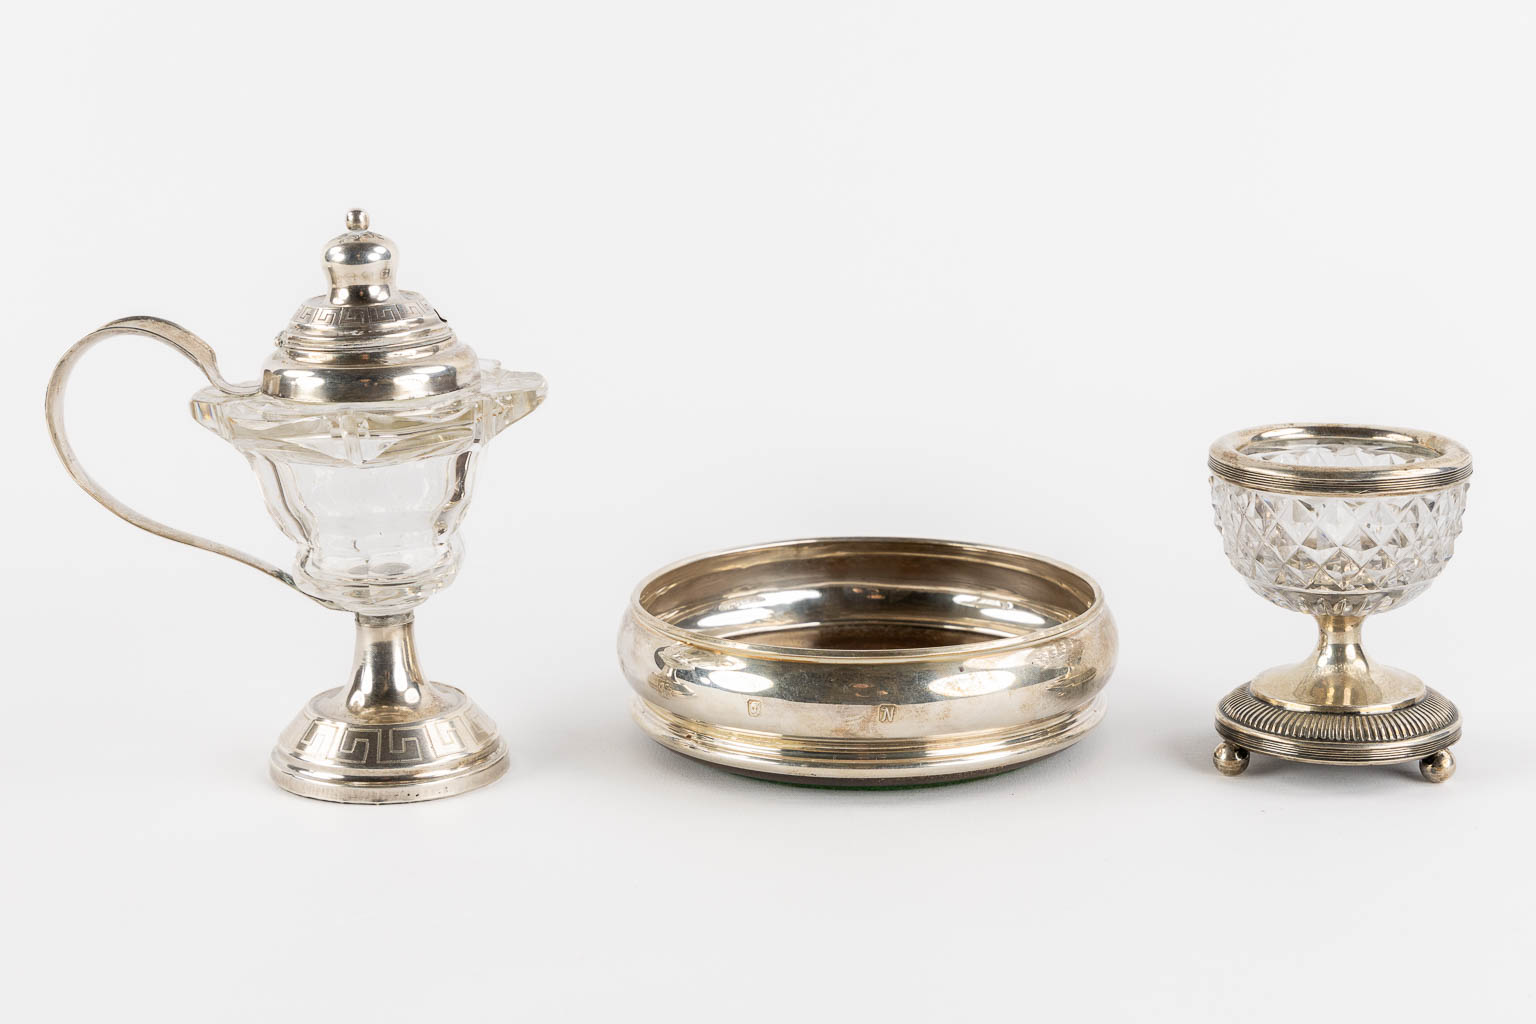 A large collection of silver and glass items, picture frames, serving ware and table accessories. 19th and 20th C. (H:28,5 cm)